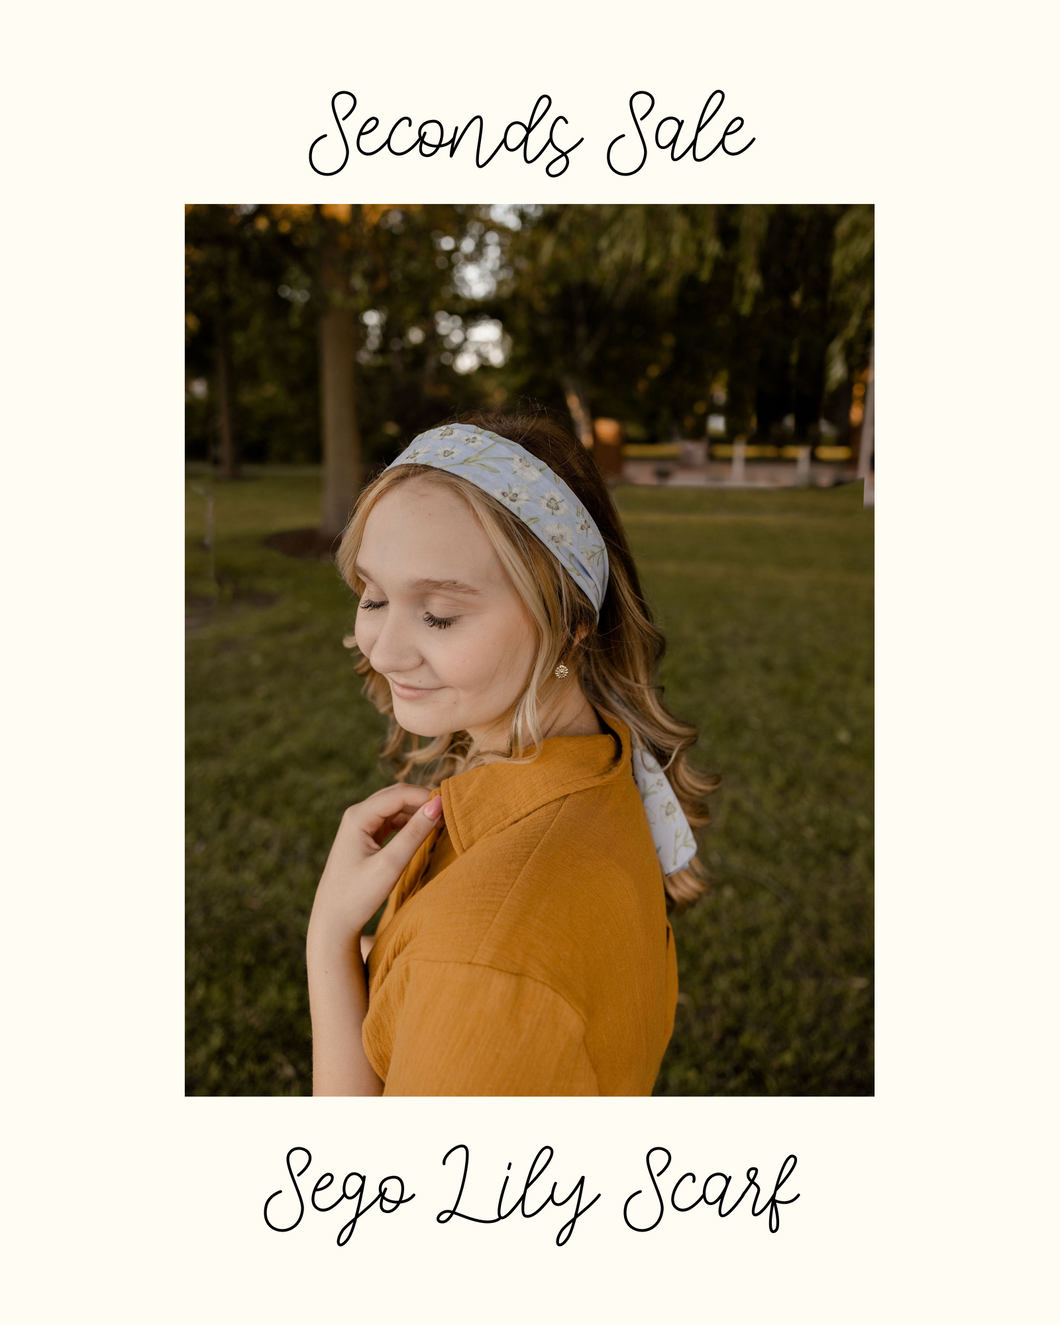 Sego Lily Scarf - Seconds Sale